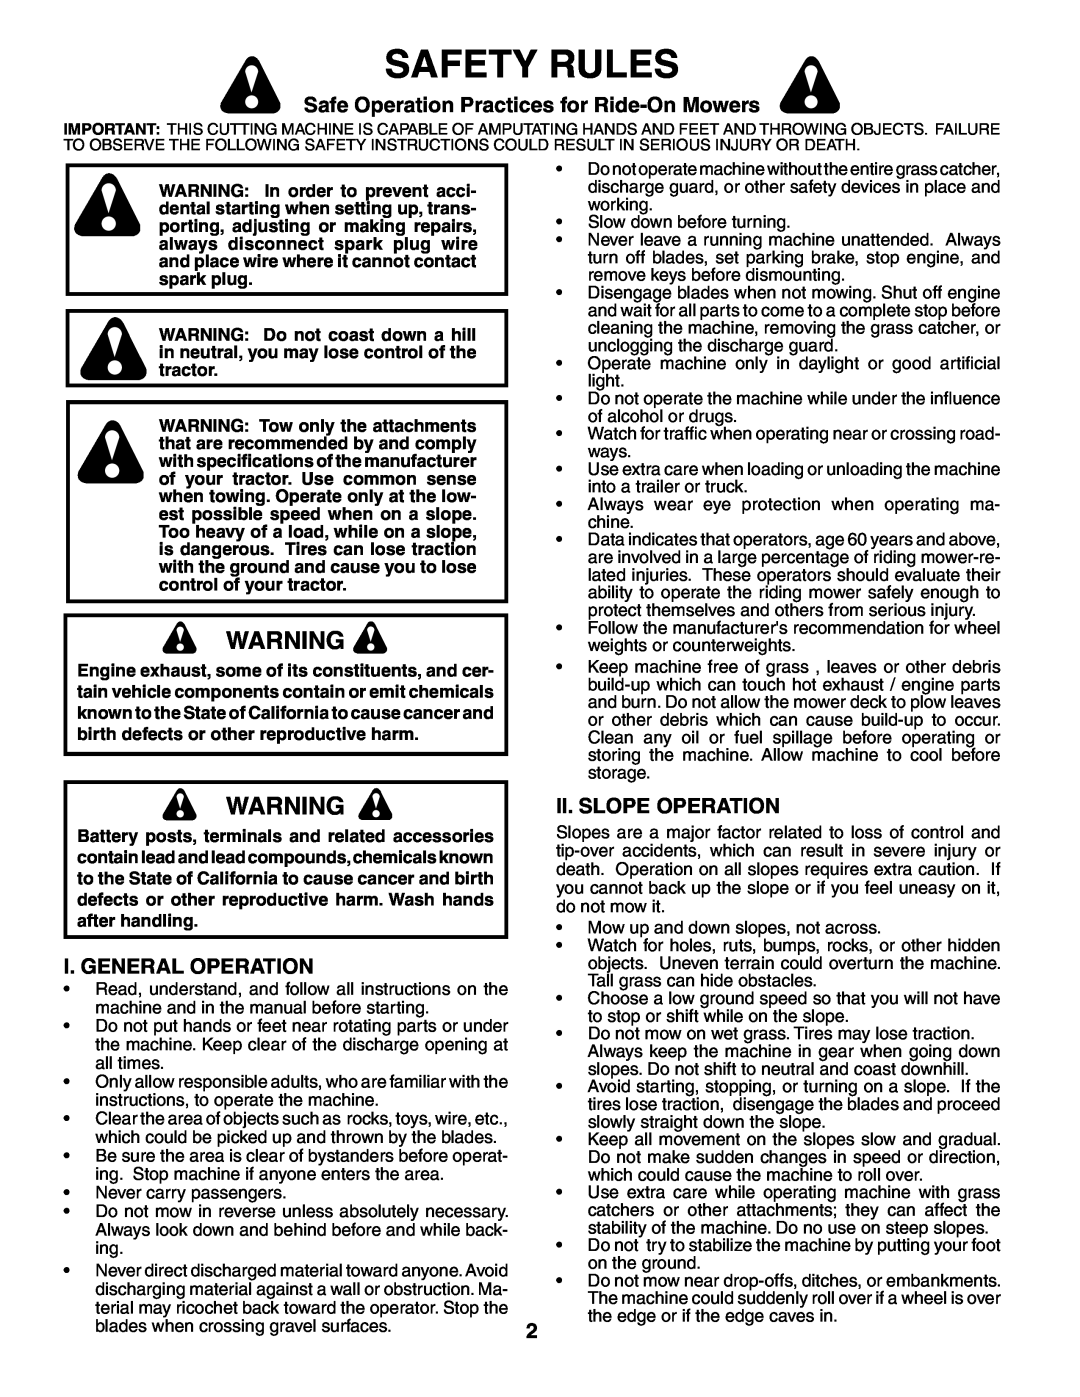 Poulan PD15538LT Safety Rules, Safe Operation Practices for Ride-On Mowers, I. General Operation, Ii. Slope Operation 